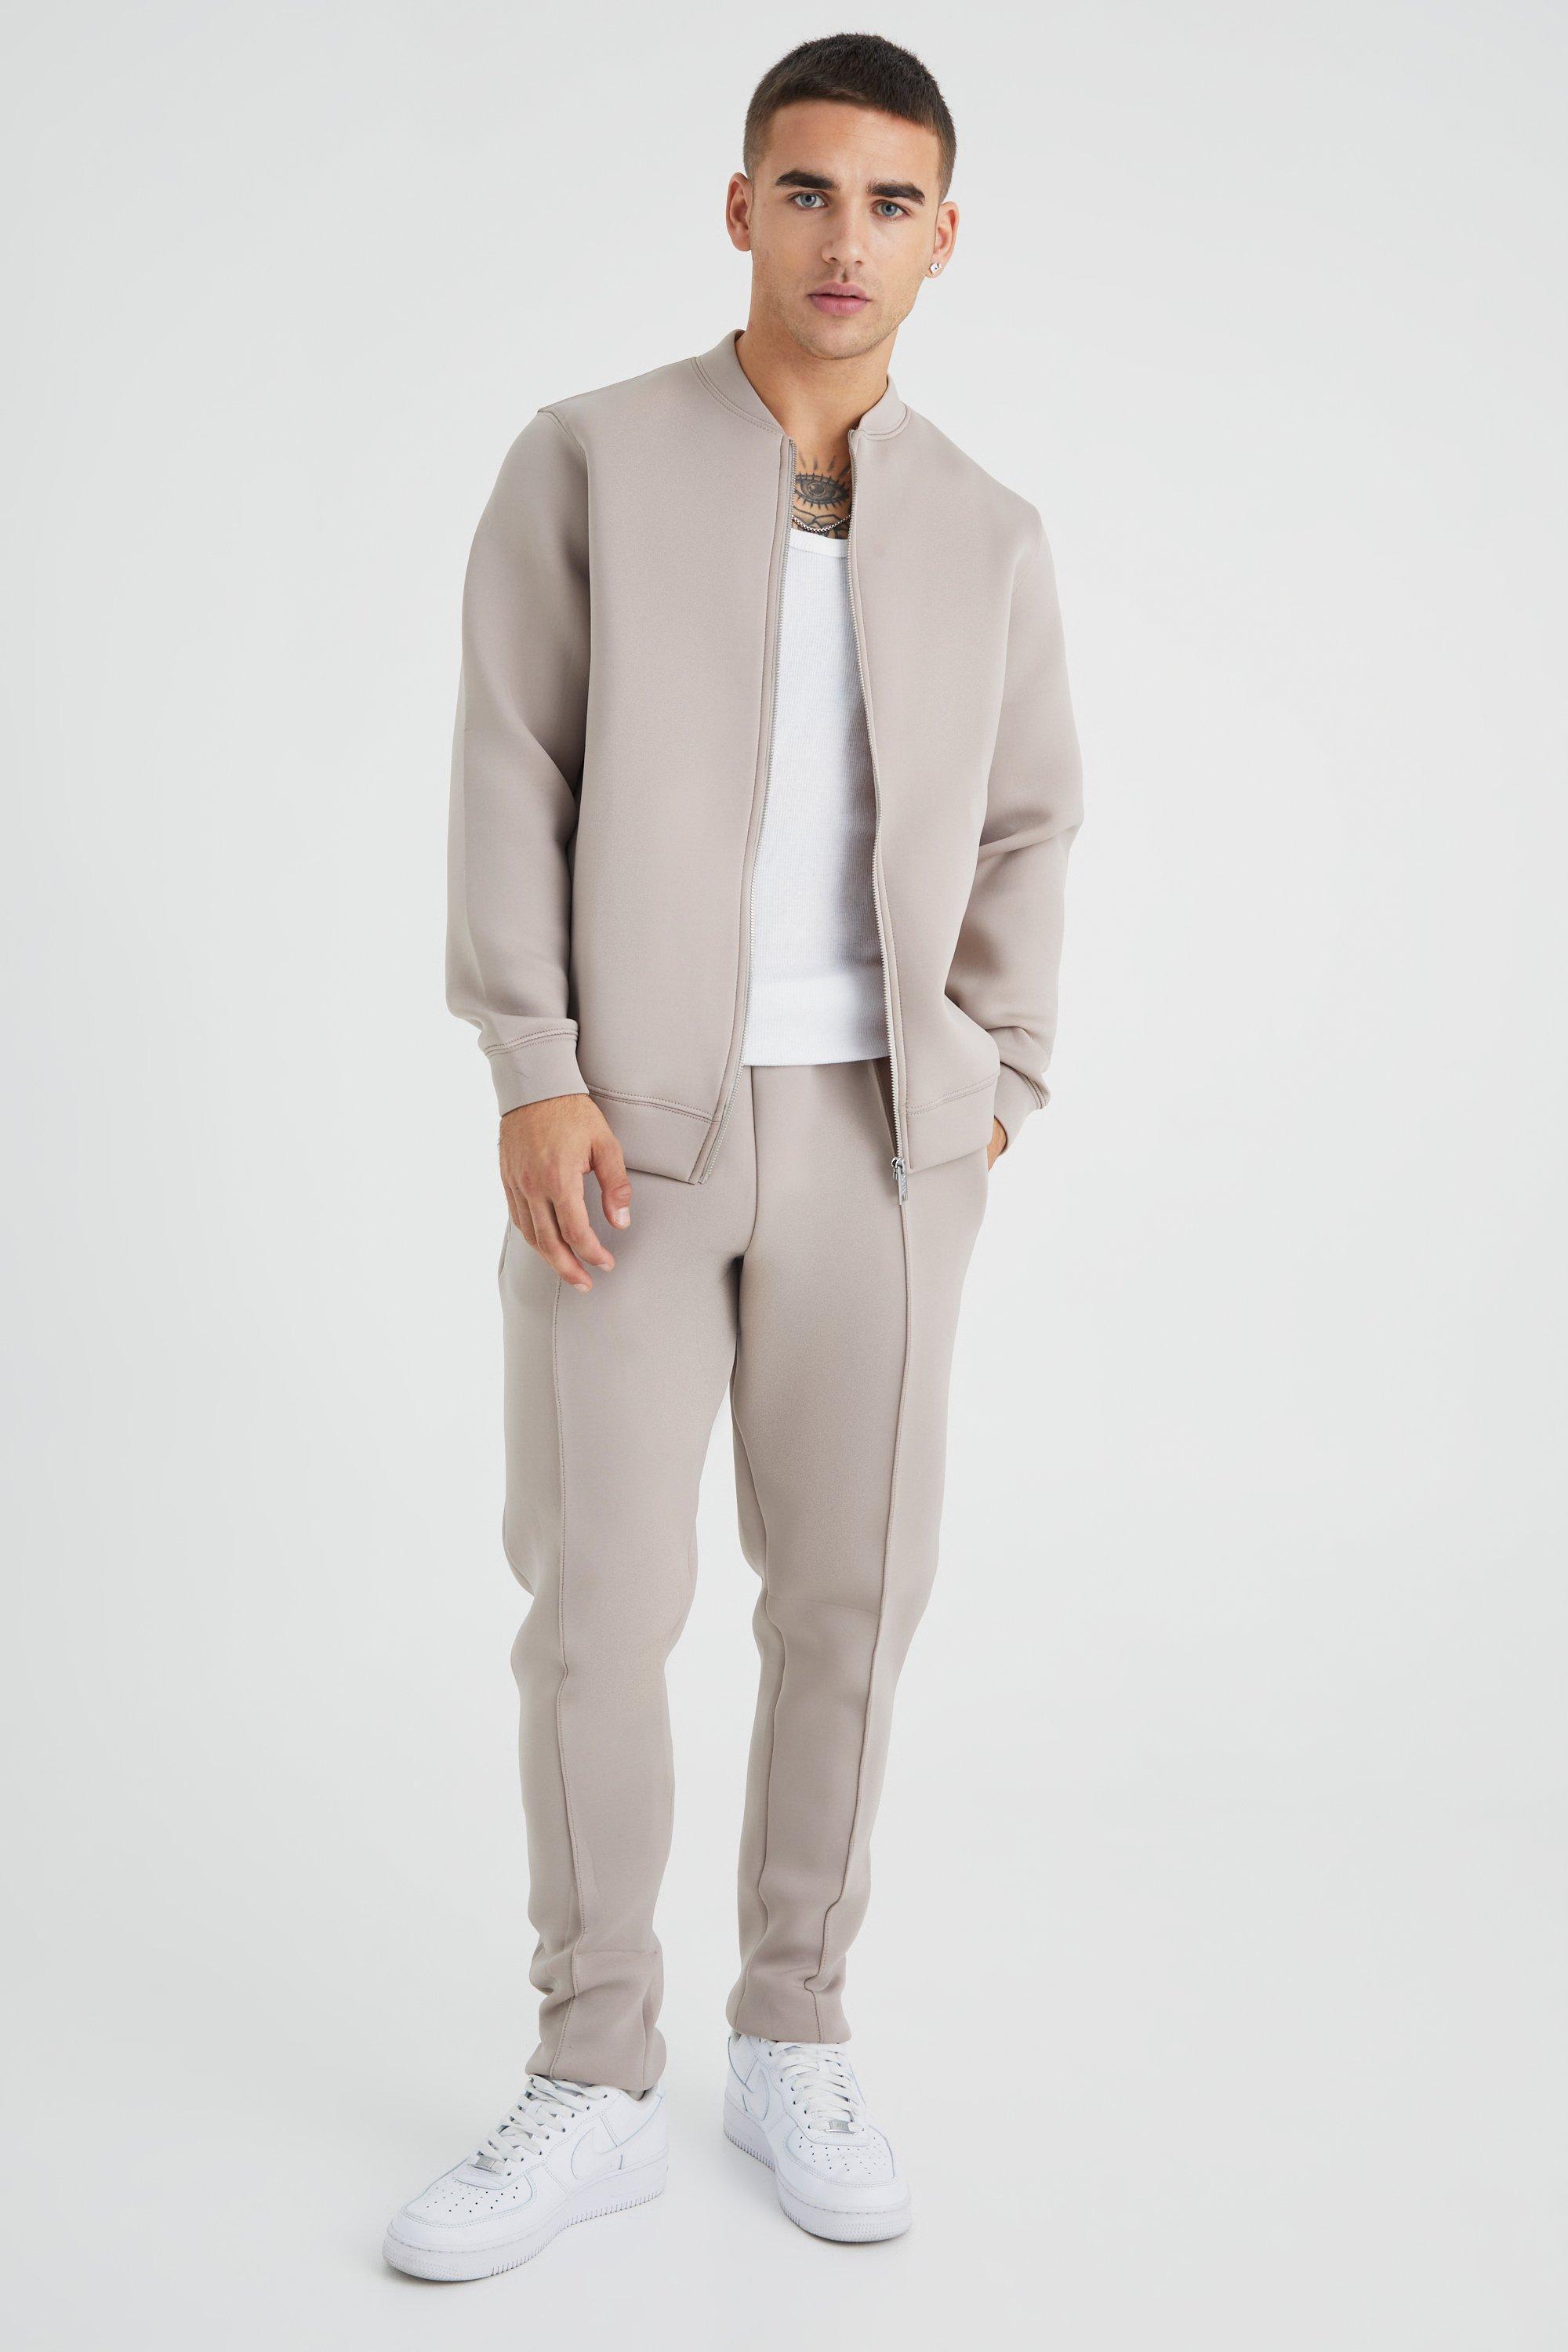 BoohooMAN Bonded Scuba Bomber Jacket & Sweatpants in Natural for